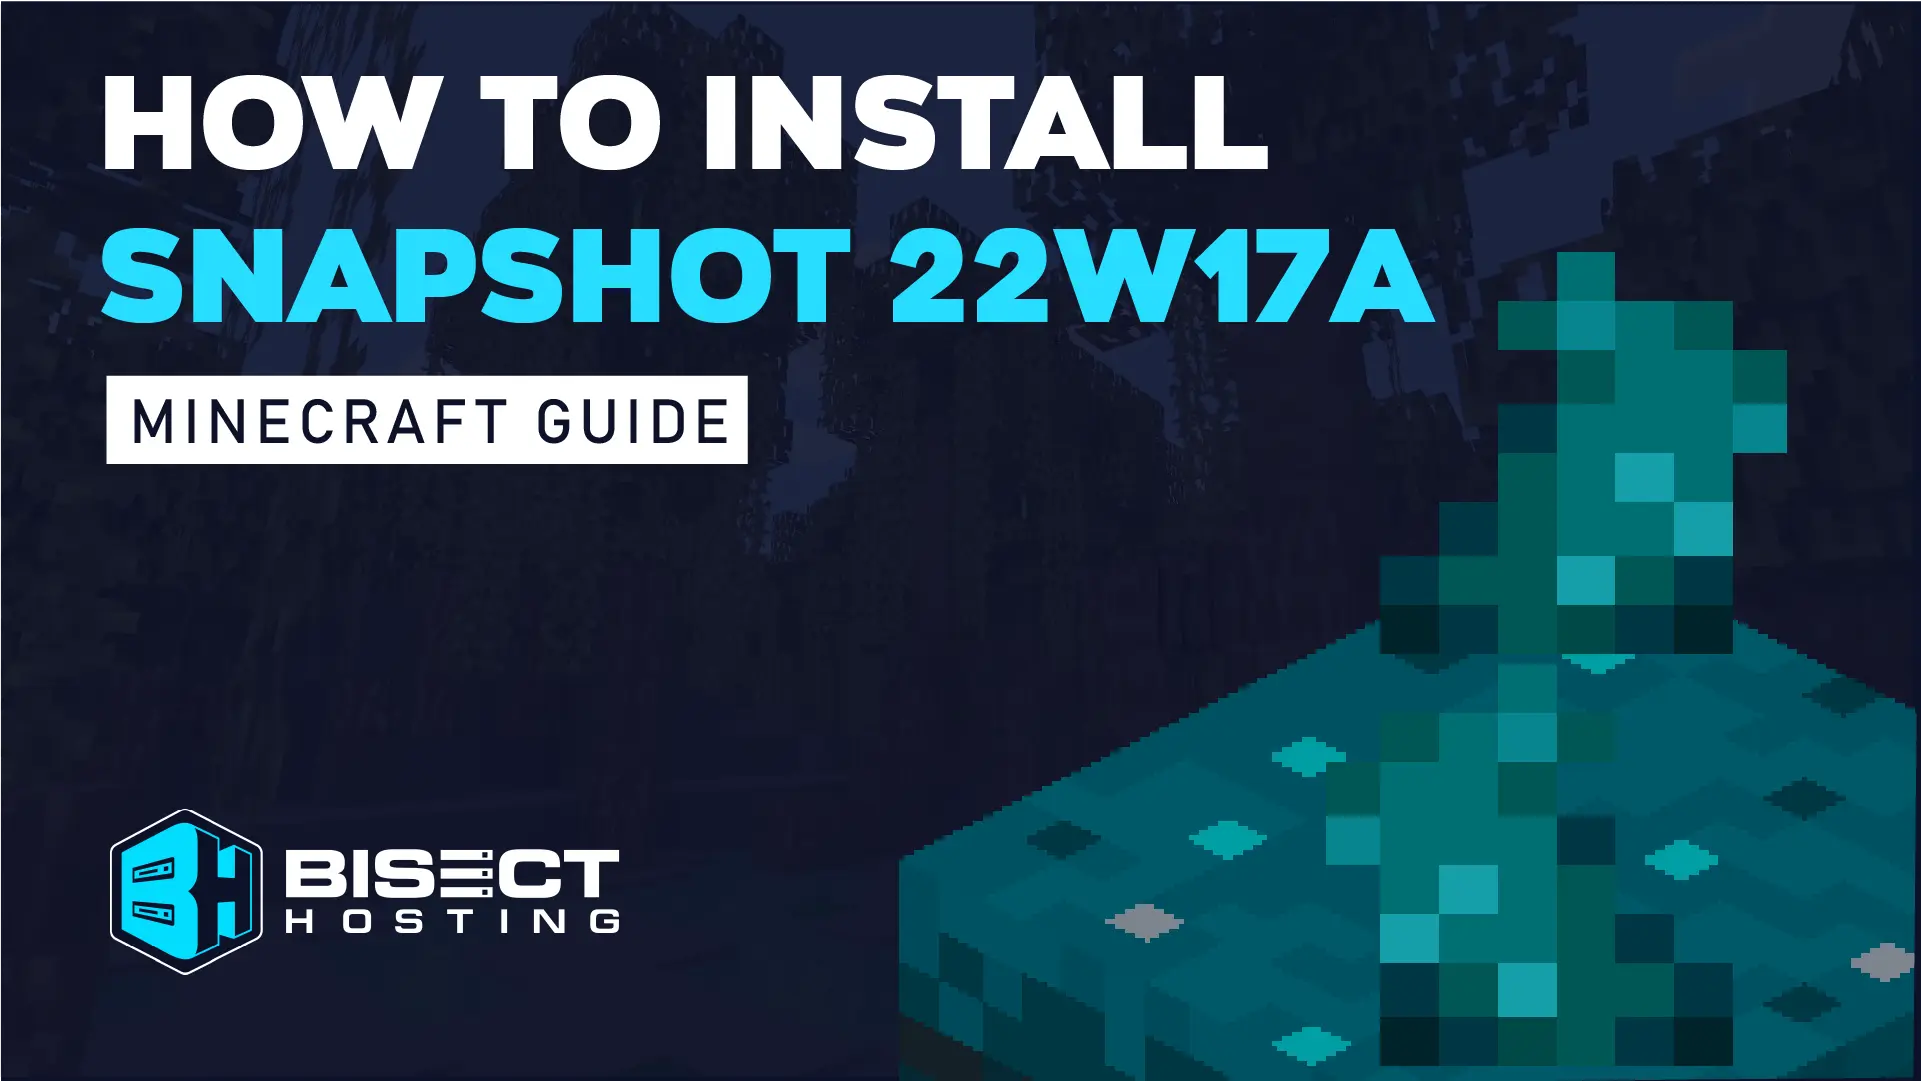 How to Install Minecraft Snapshot 22w17a